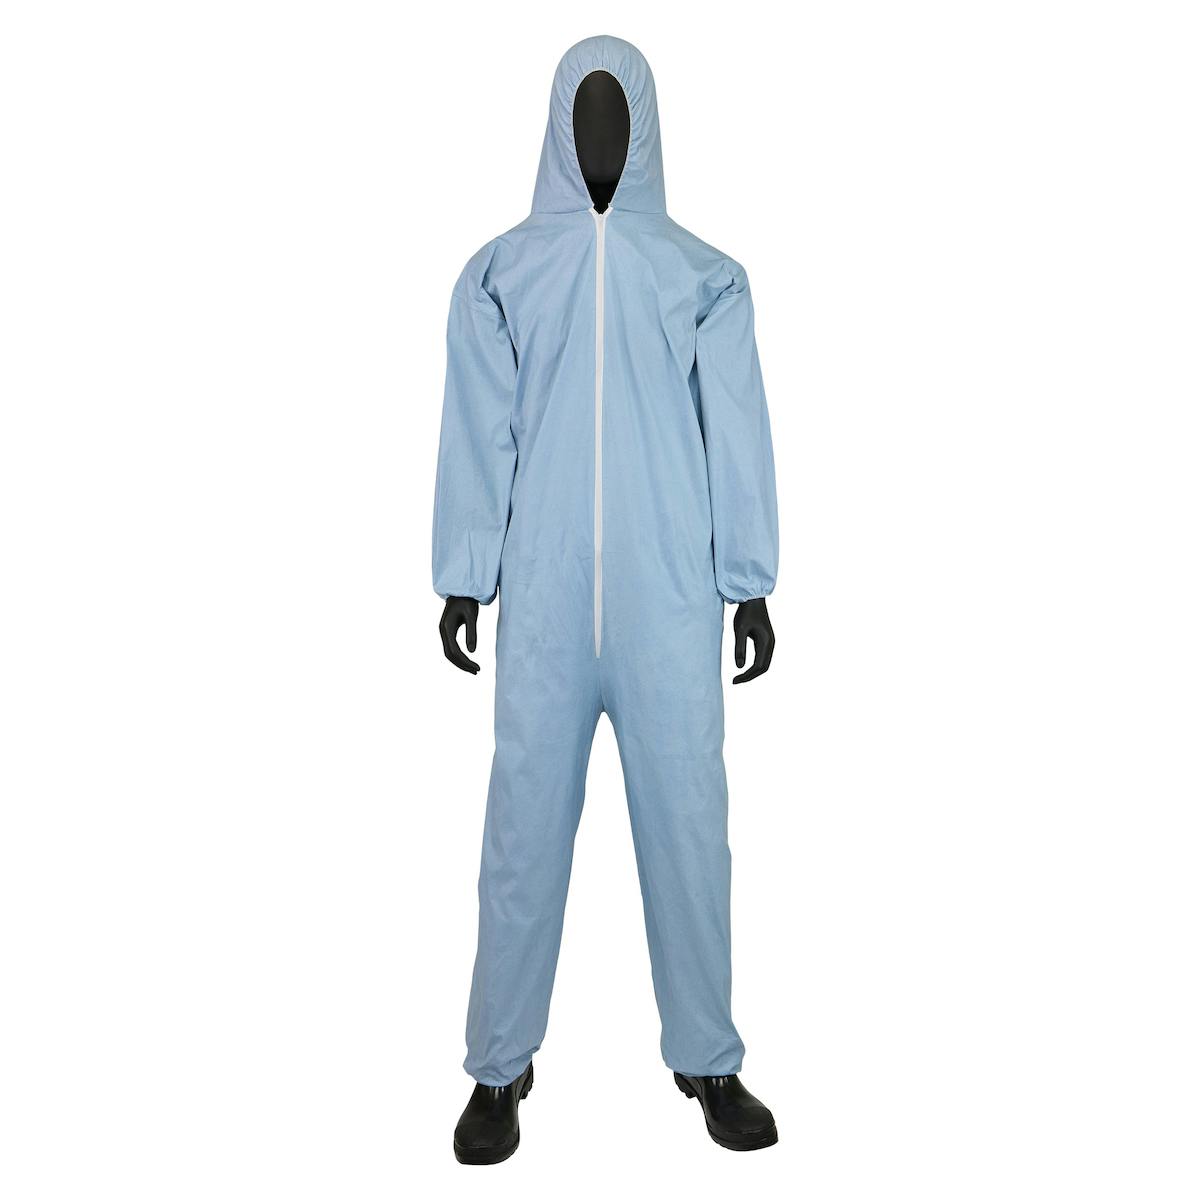 Posi-Wear Flame Resistant Coverall with Hood, Elastic Wrists and Ankles, 80 gsm, Blue (3106)